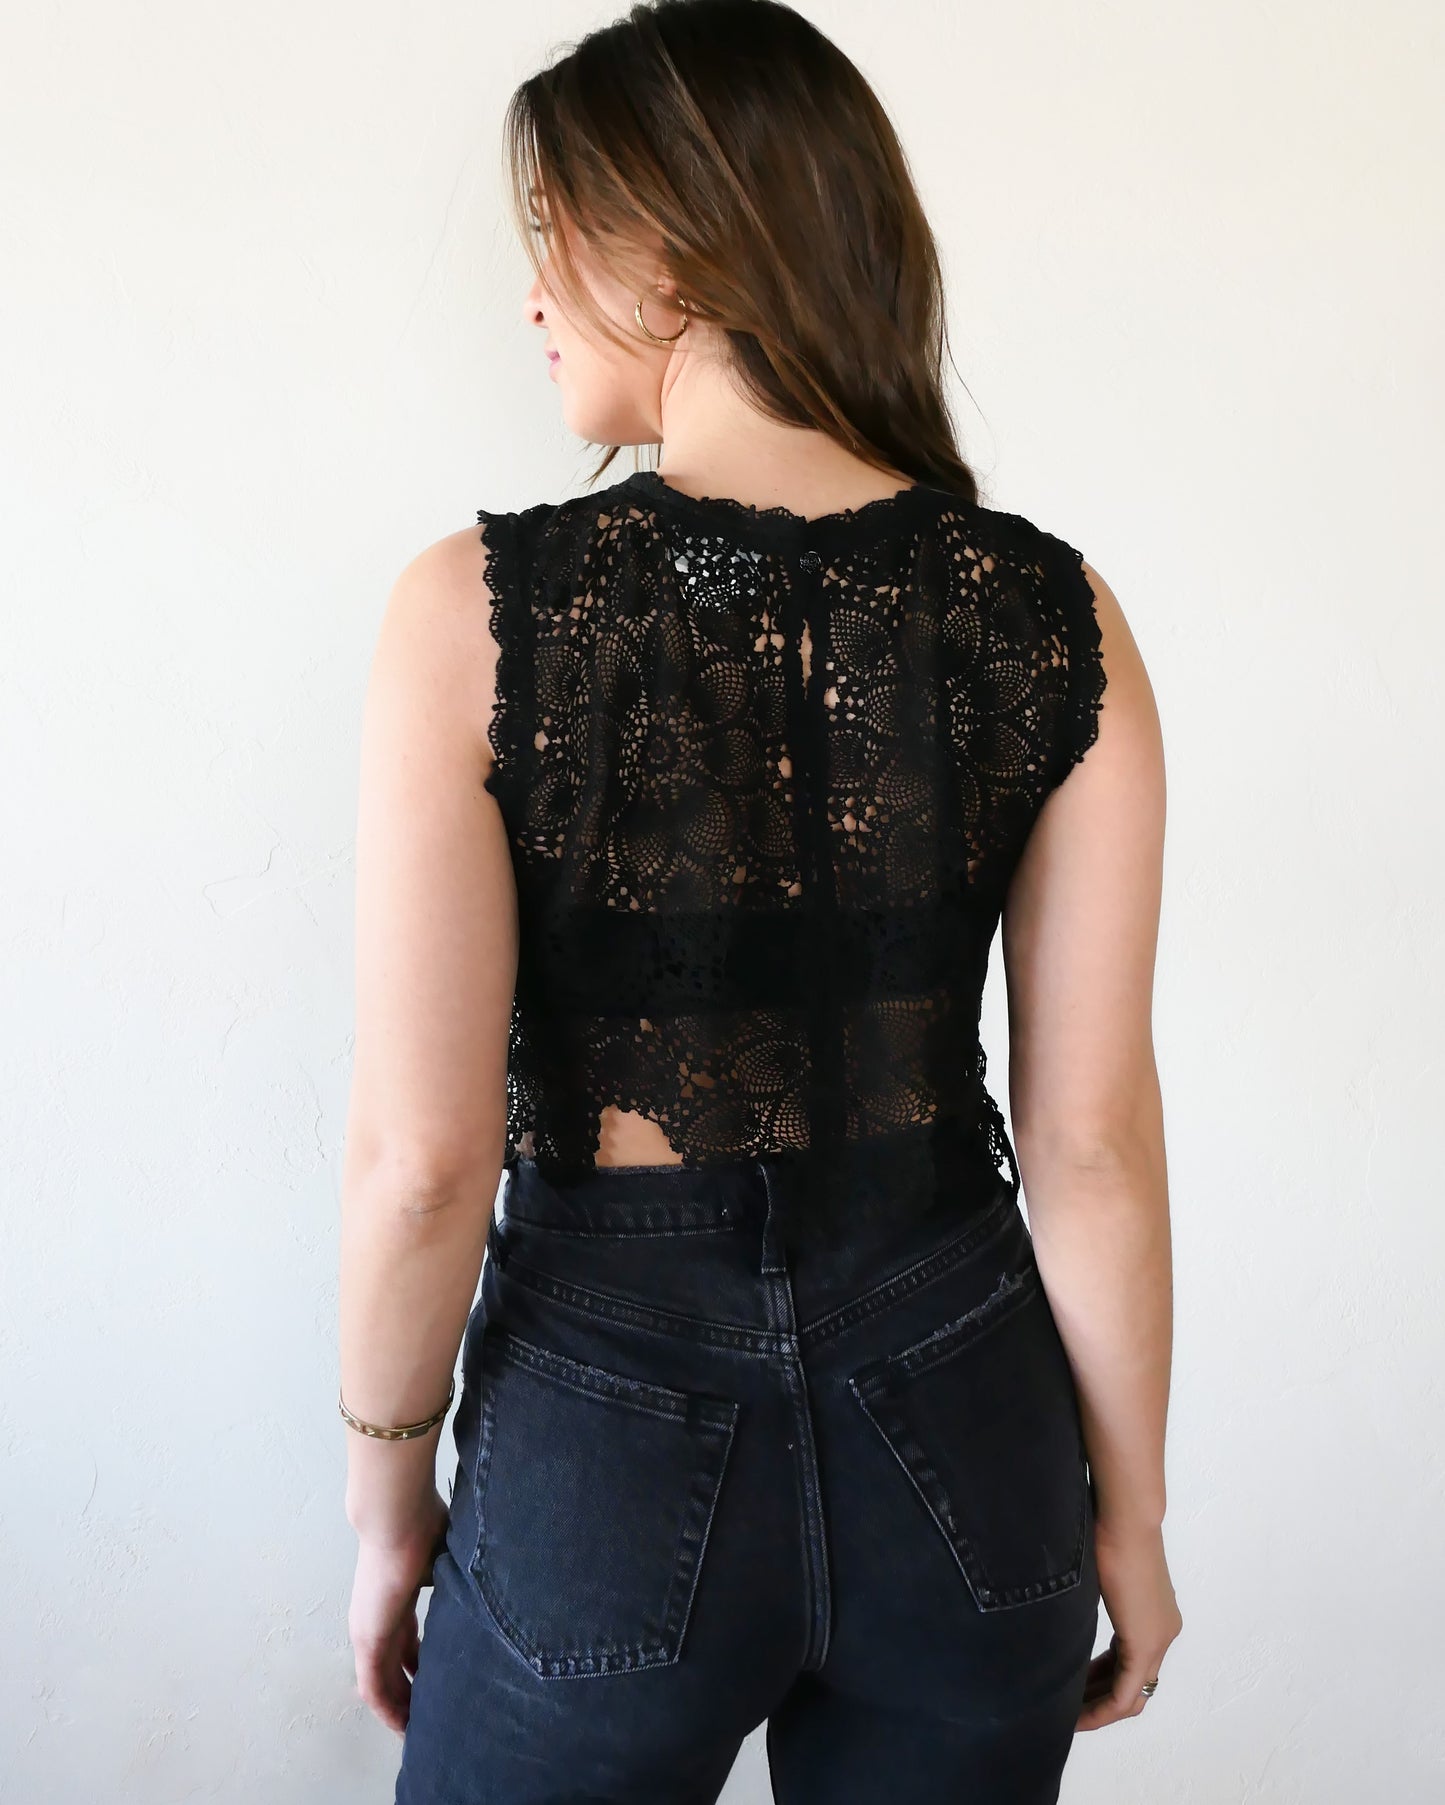 Back view. An ultra casual, hip, and boho-chic crop tank top made with interconnected flower doilies reminiscent of the white lotus, which symbolizes peace, tranquility, and calmness.  Lace trim at the collar and sleeve.  Model is wearing black colored top by Lim's Vintage.